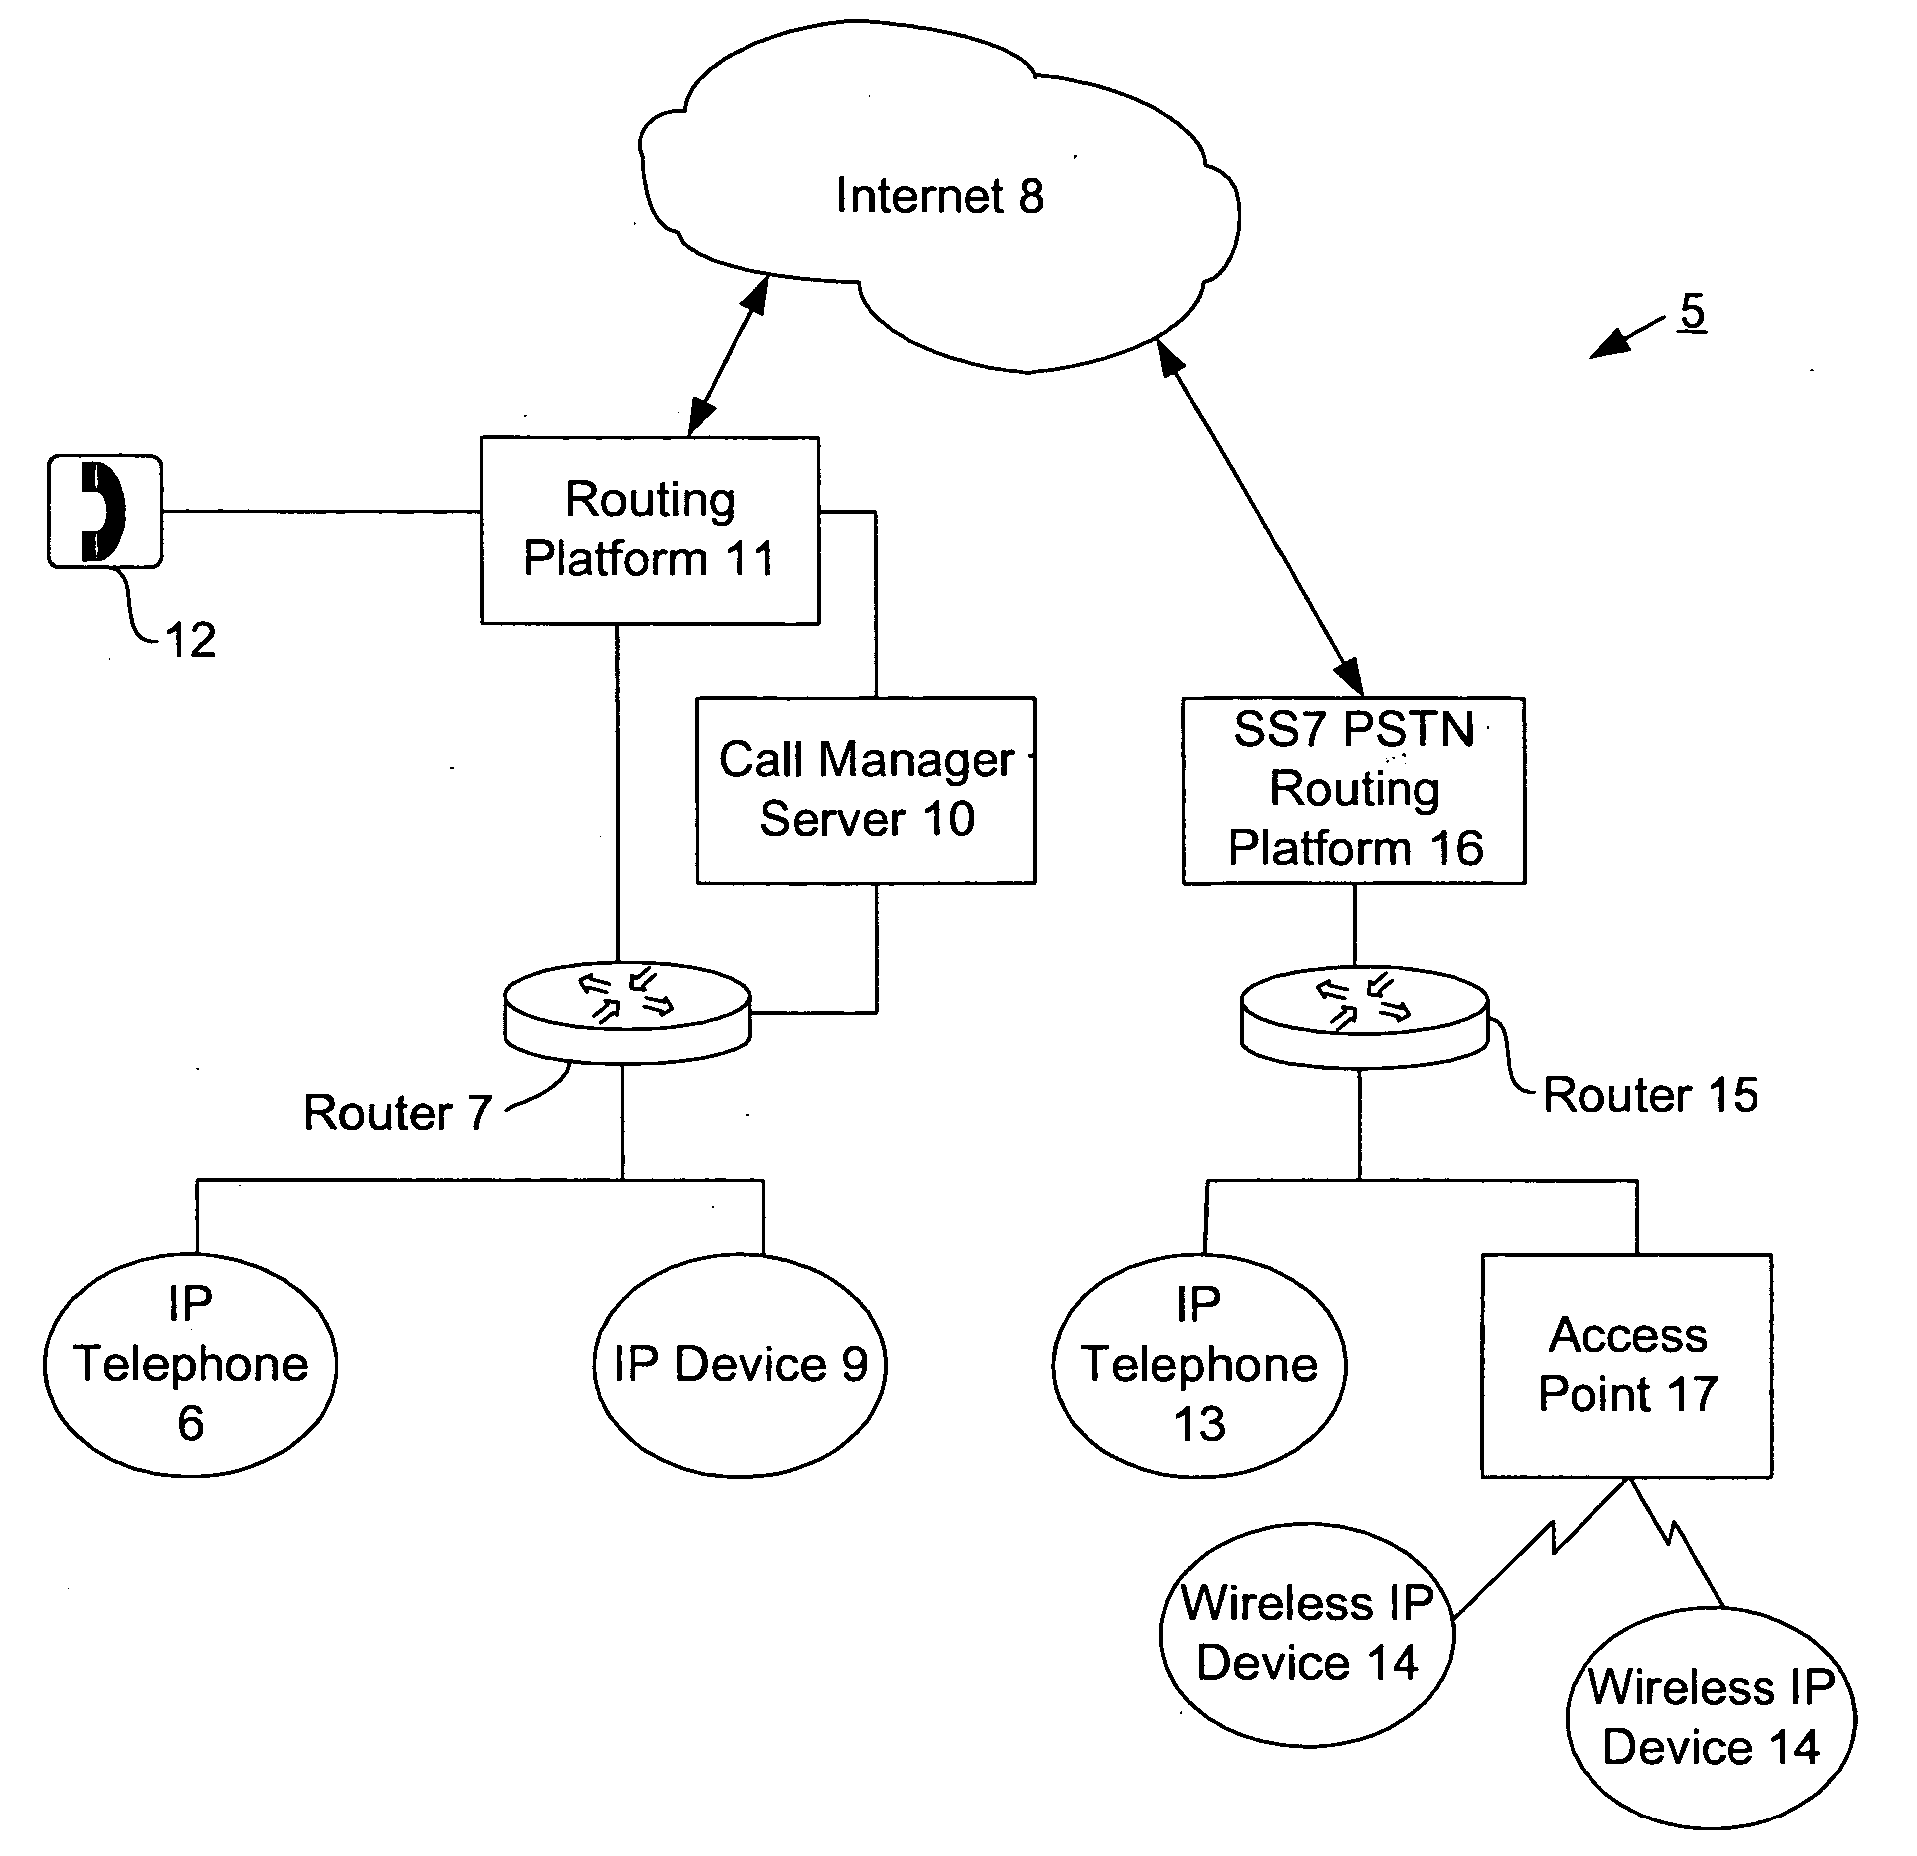 User semantic overlay for troubleshooting convergent network problems